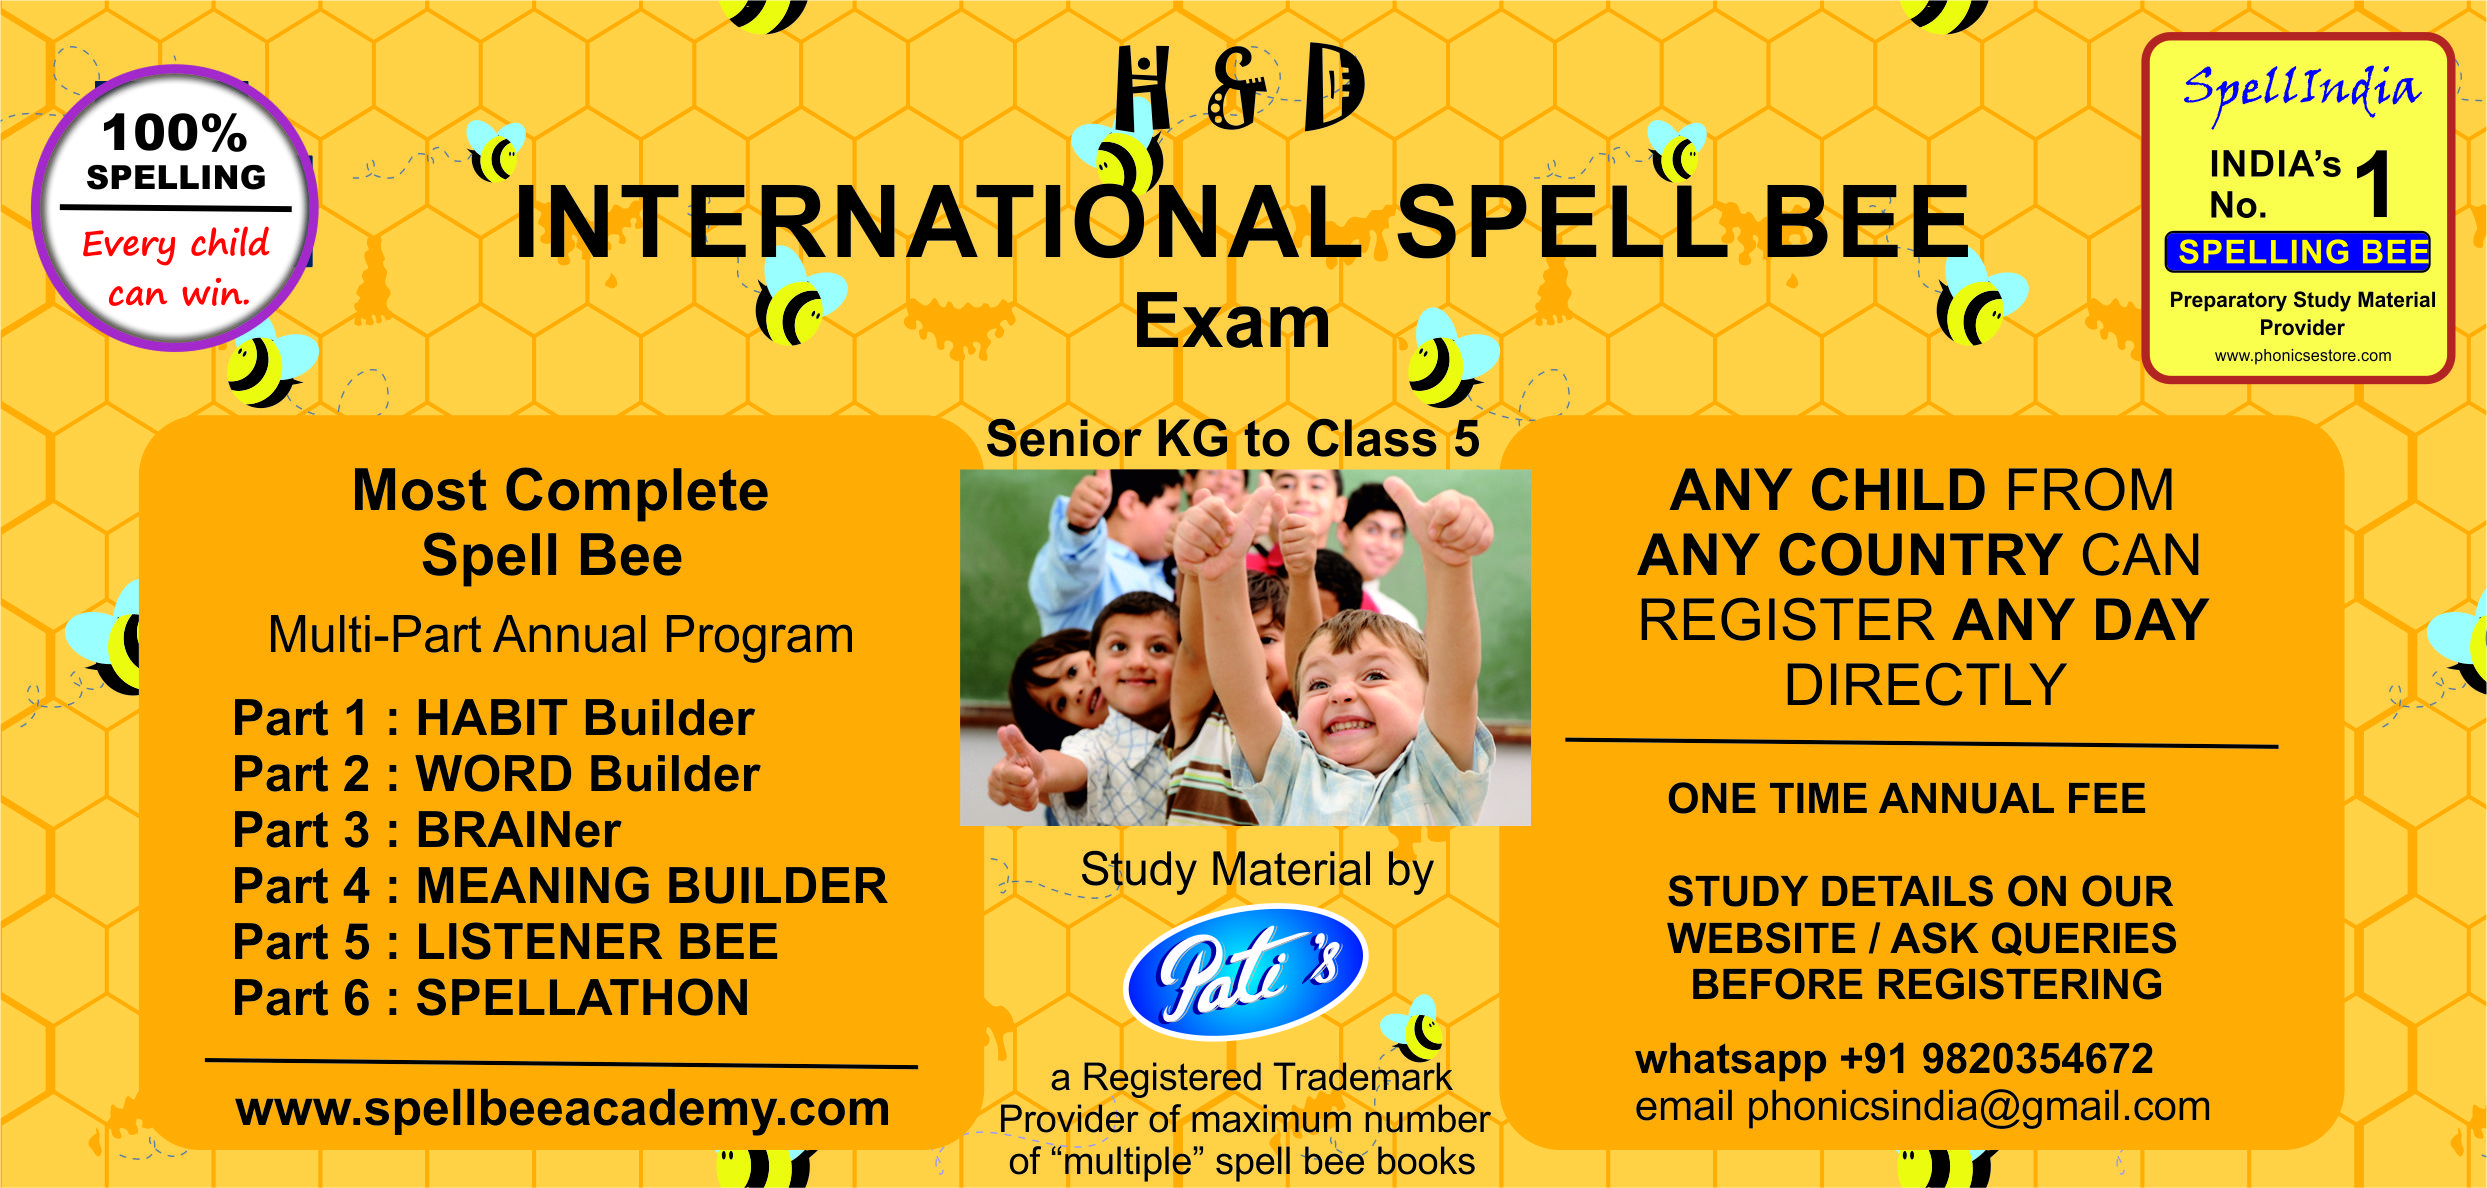 Spelling Competition - International Spell Bee Exam